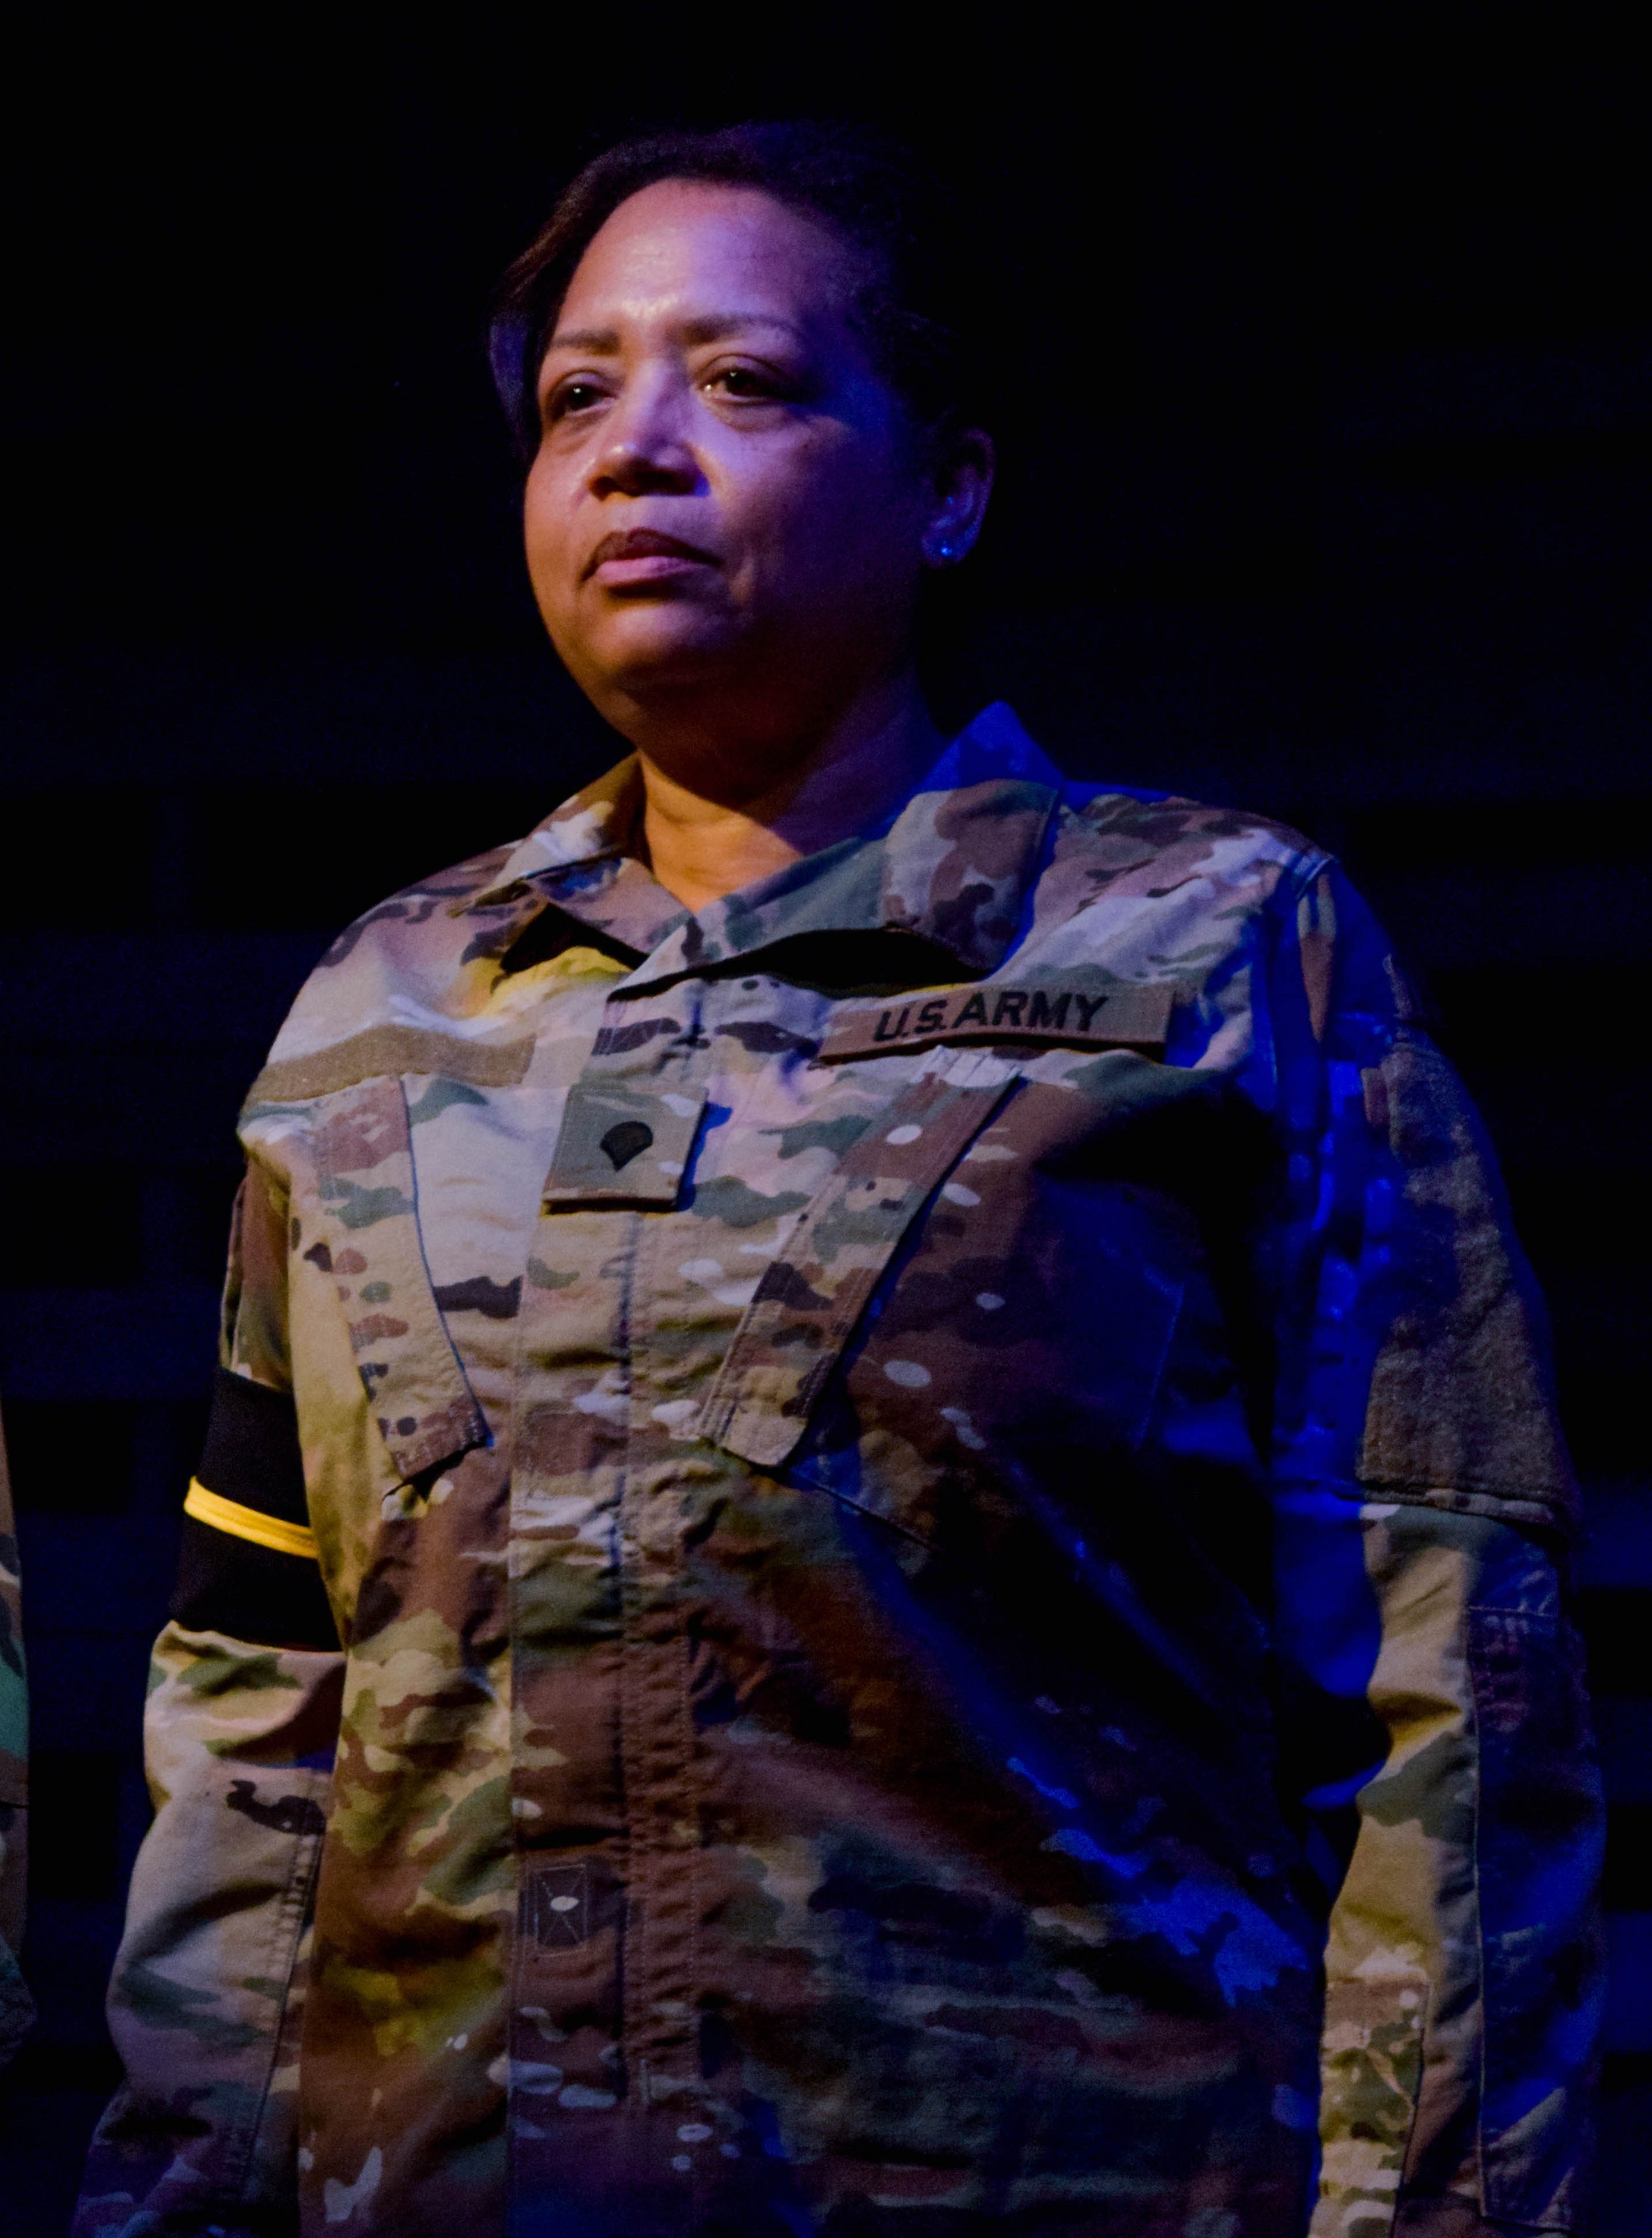 (L-R) Judy Welch in a performance of Marching On at The Wallis. PHOTO CREDIT: Nate Albus